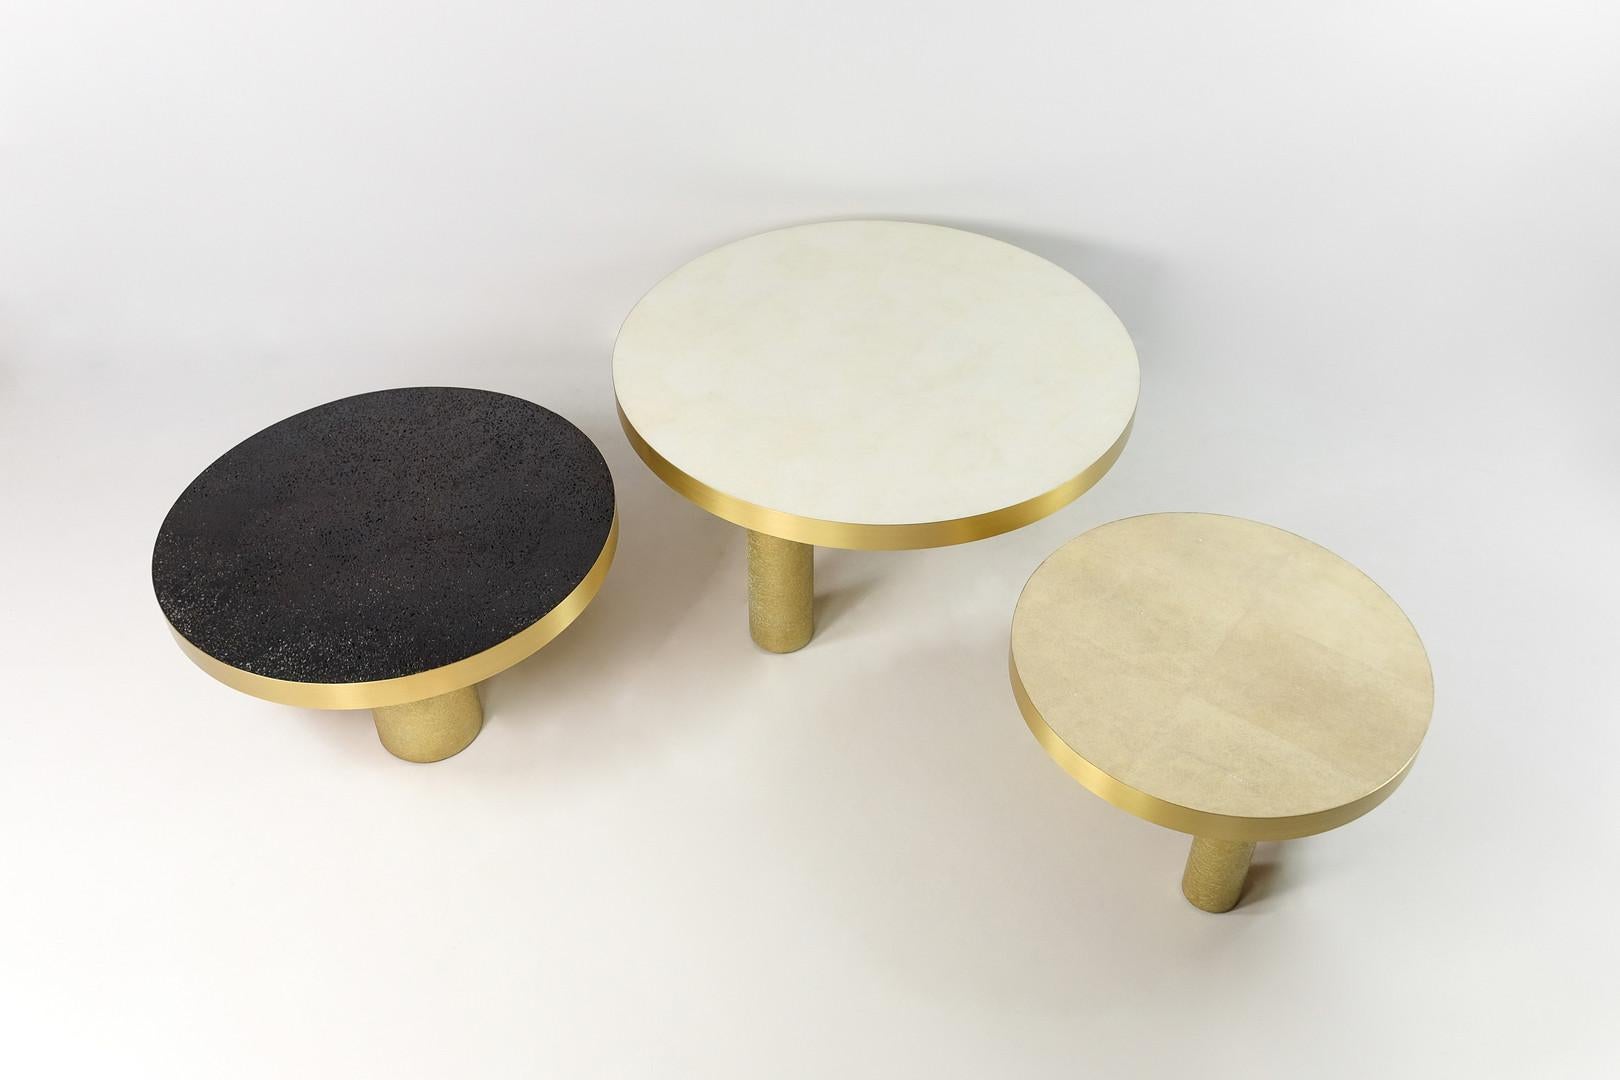 Contemporary Set of 3 Round Coffee Tables in Rock Crystal, Shagreen and Stone by Ginger Brown For Sale